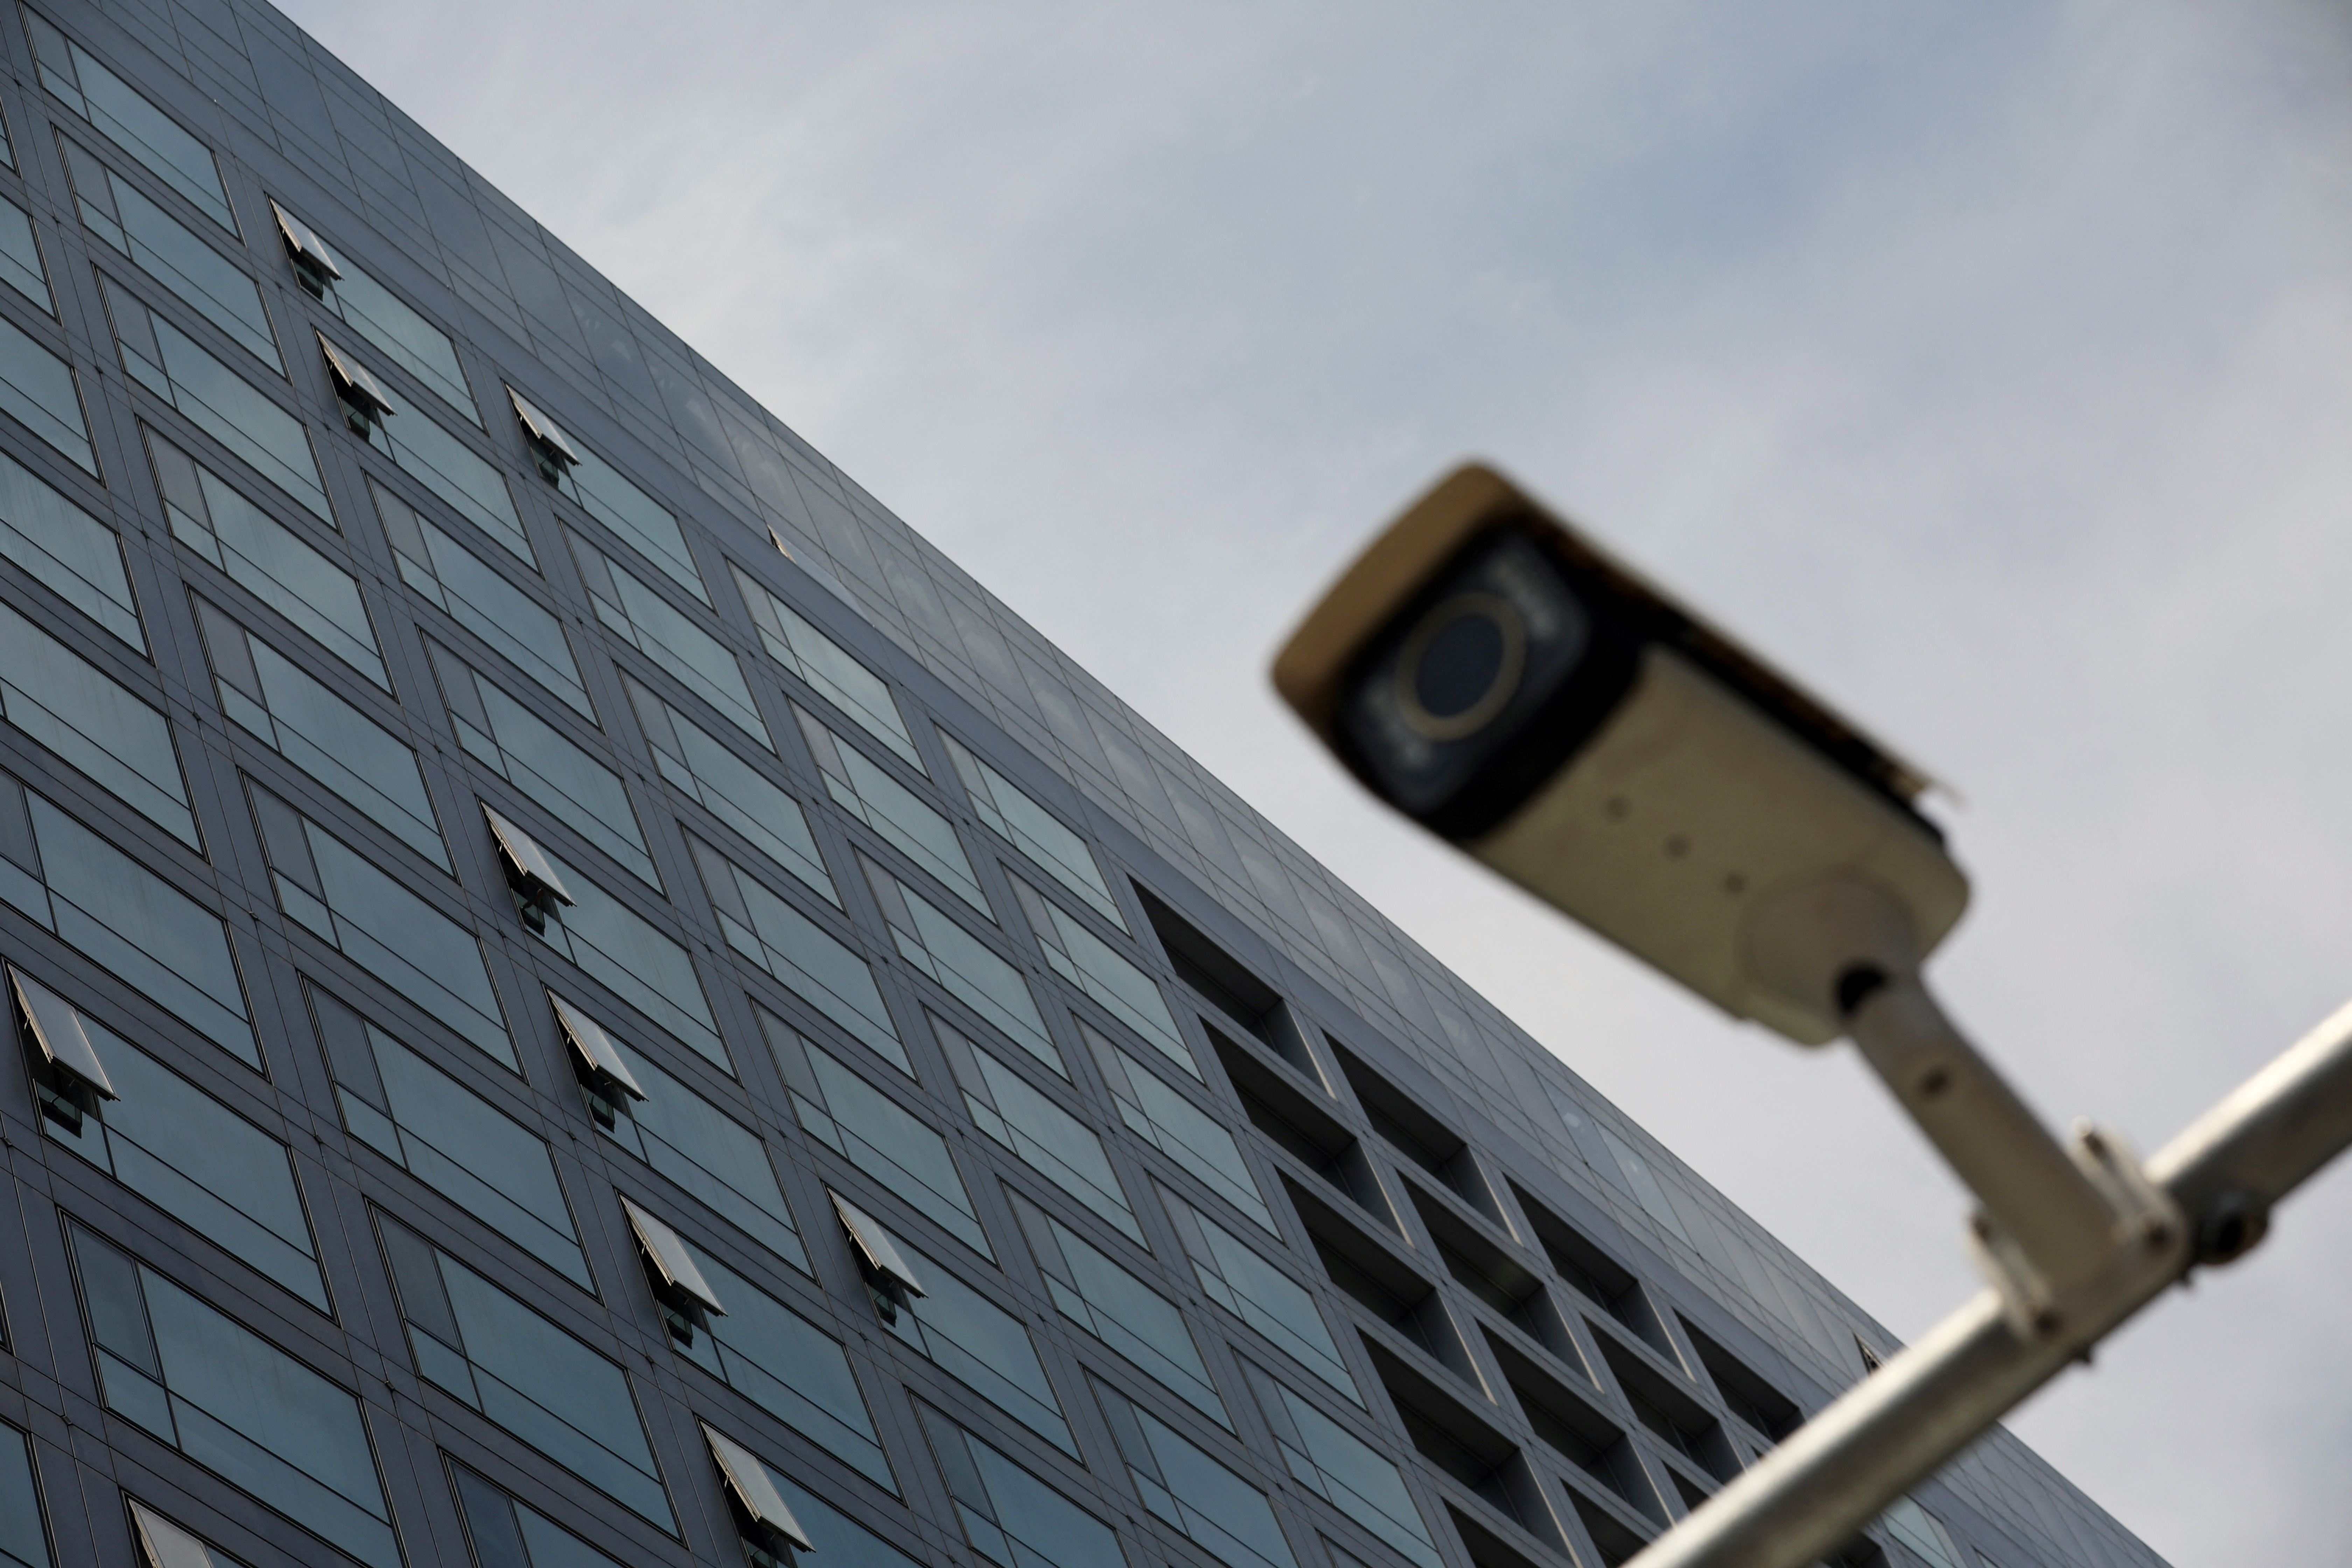 A surveillance camera is pictured outside the China Securities Regulatory Commission (CSRC) building on the Financial Street in Beijing, China July 9, 2021. REUTERS/Tingshu Wang